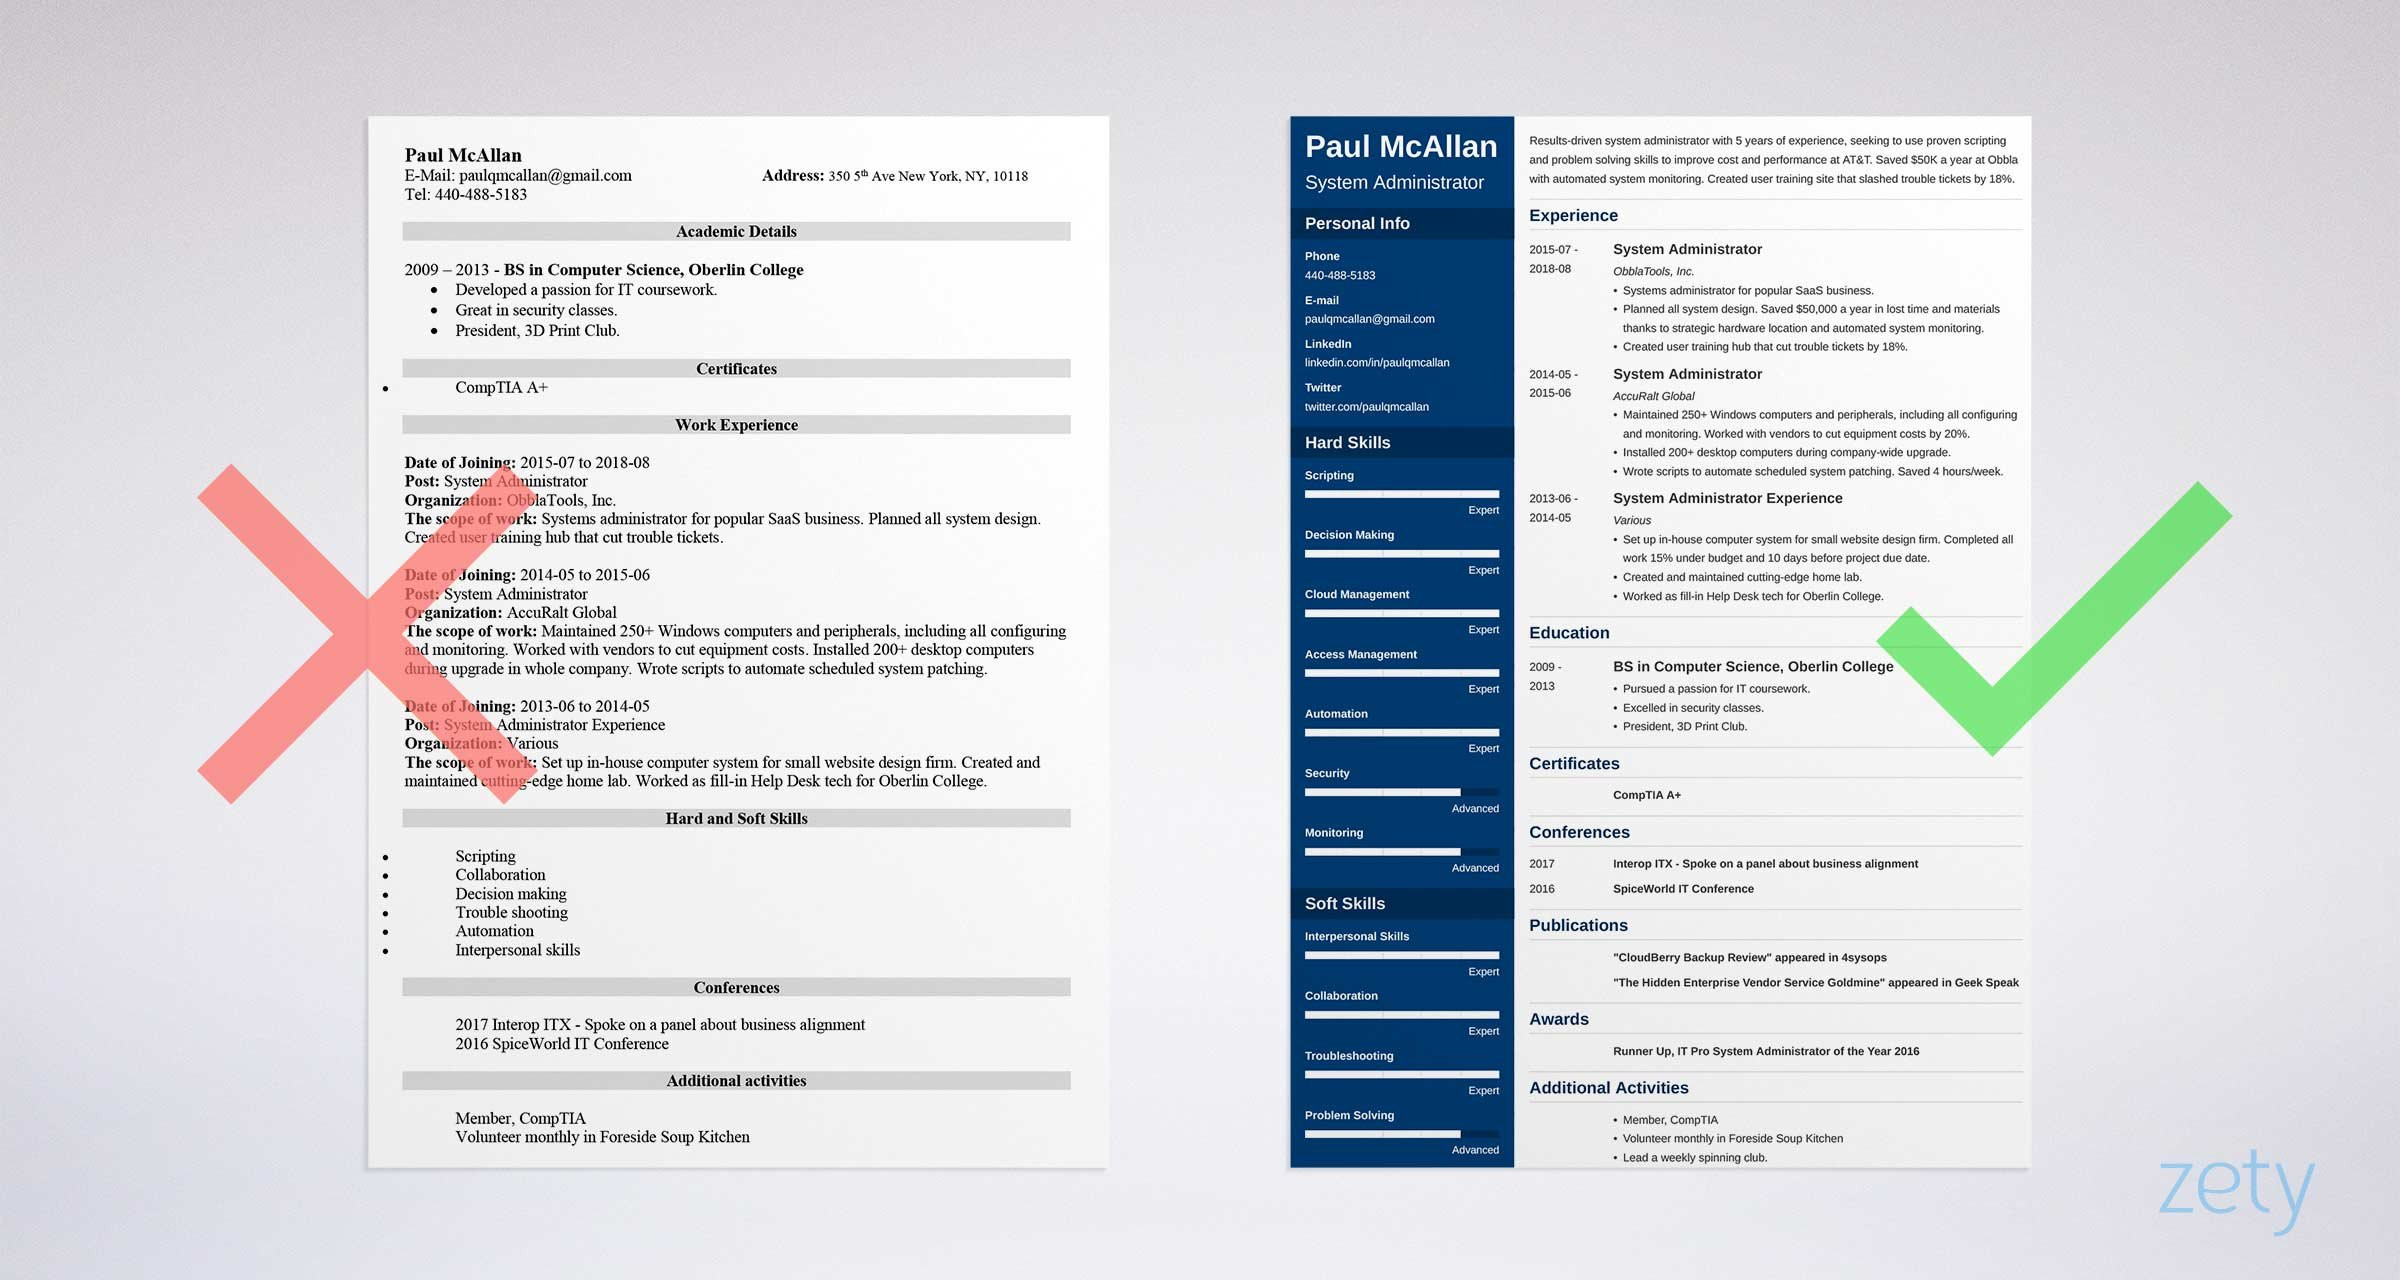 Sample Resume for Experienced Linux System Administrator System Administrator Resume Sample (windows or Linux)